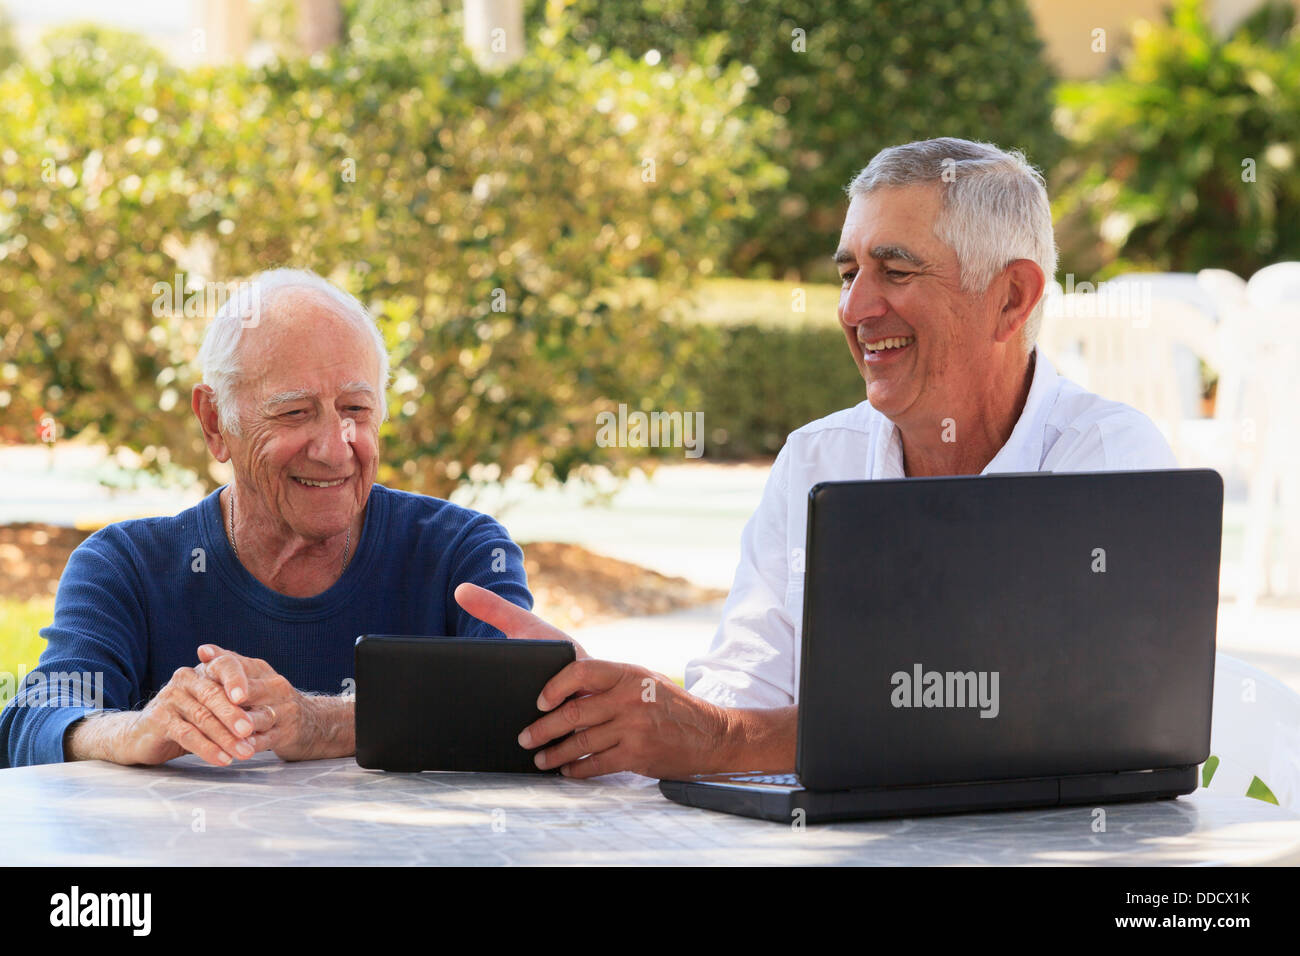 Senior man smiling showing a digital tablet to his father Stock Photo